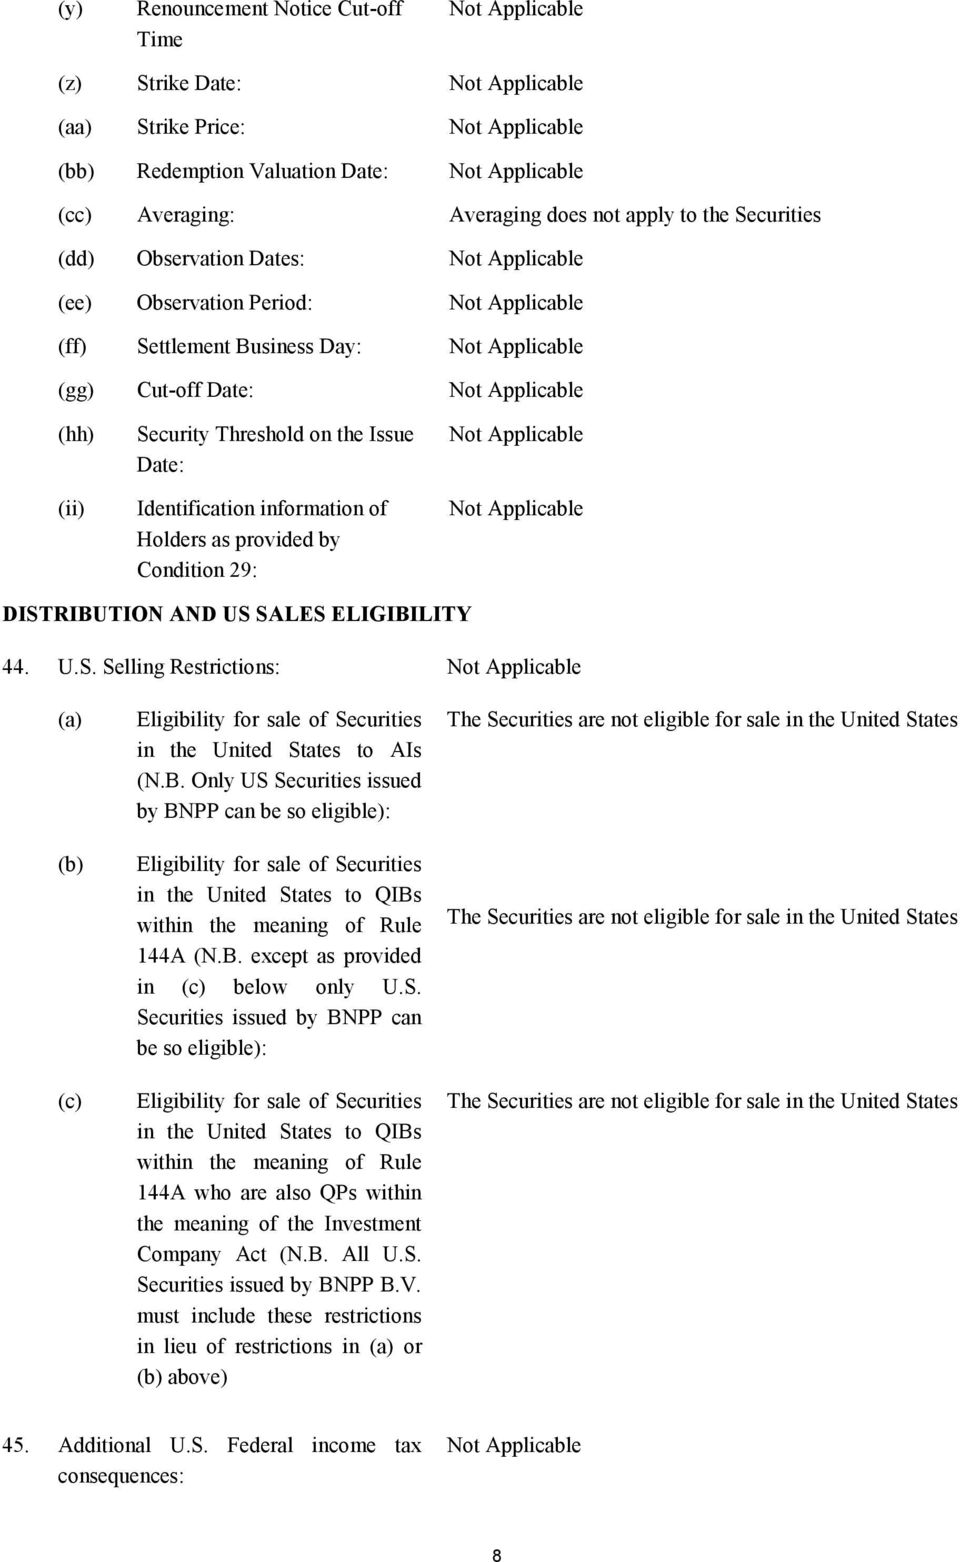 AND US SALES ELIGIBILITY 44. U.S. Selling Restrictions: (a) (b) (c) Eligibility for sale of Securities in the United States to AIs (N.B. Only US Securities issued by BNPP can be so eligible): Eligibility for sale of Securities in the United States to QIBs within the meaning of Rule 144A (N.